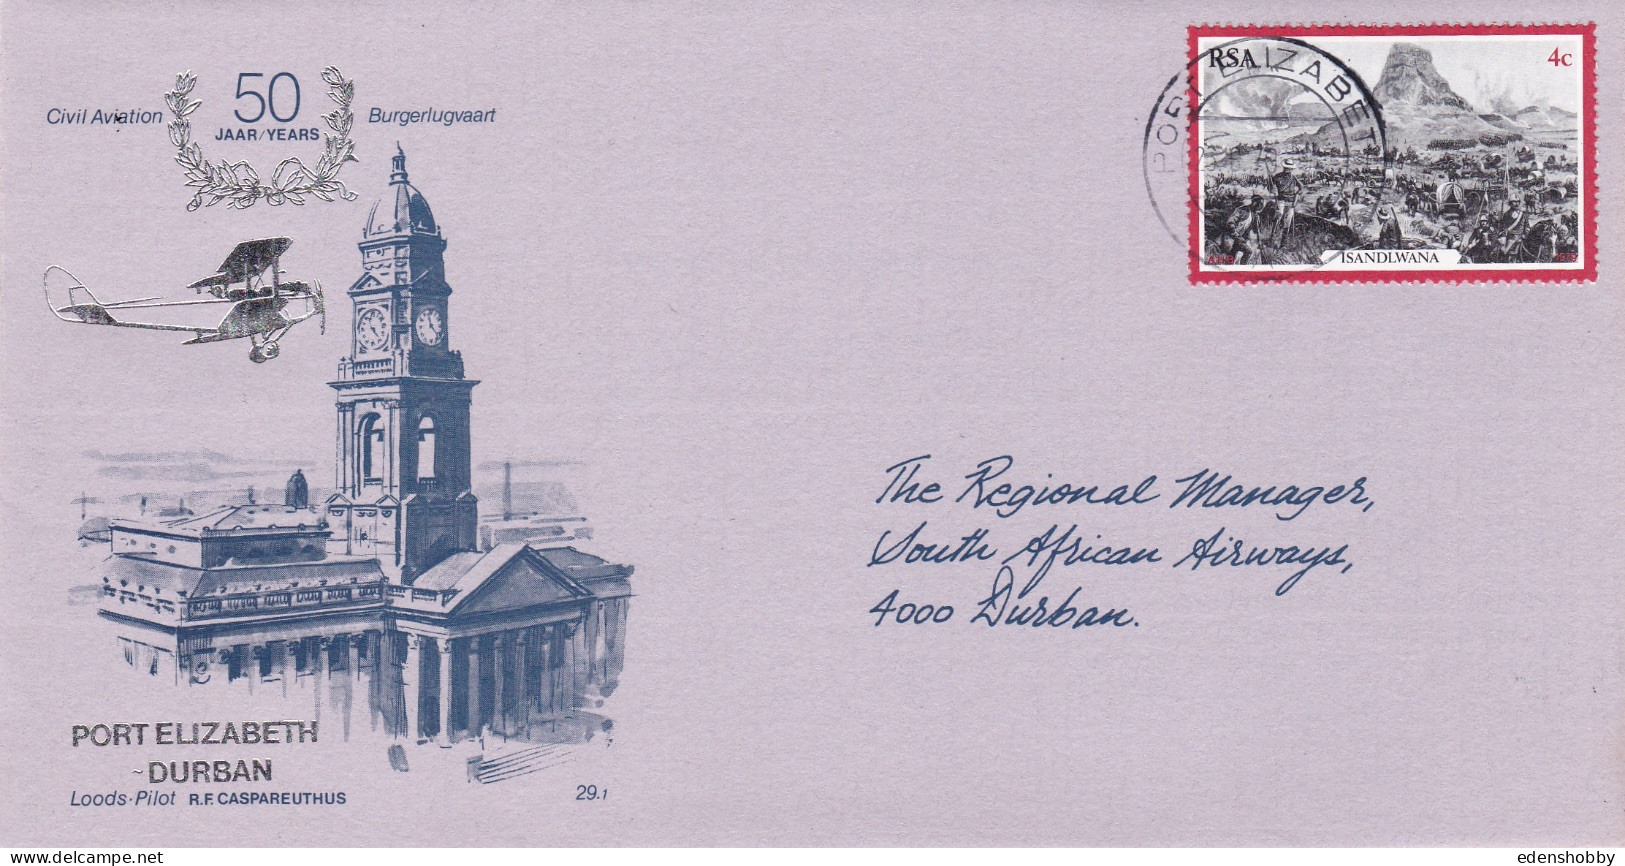 1977 South Africa First Day Covers - 10 Official Commemorative South African Airways Flight Covers with info inserts FDC